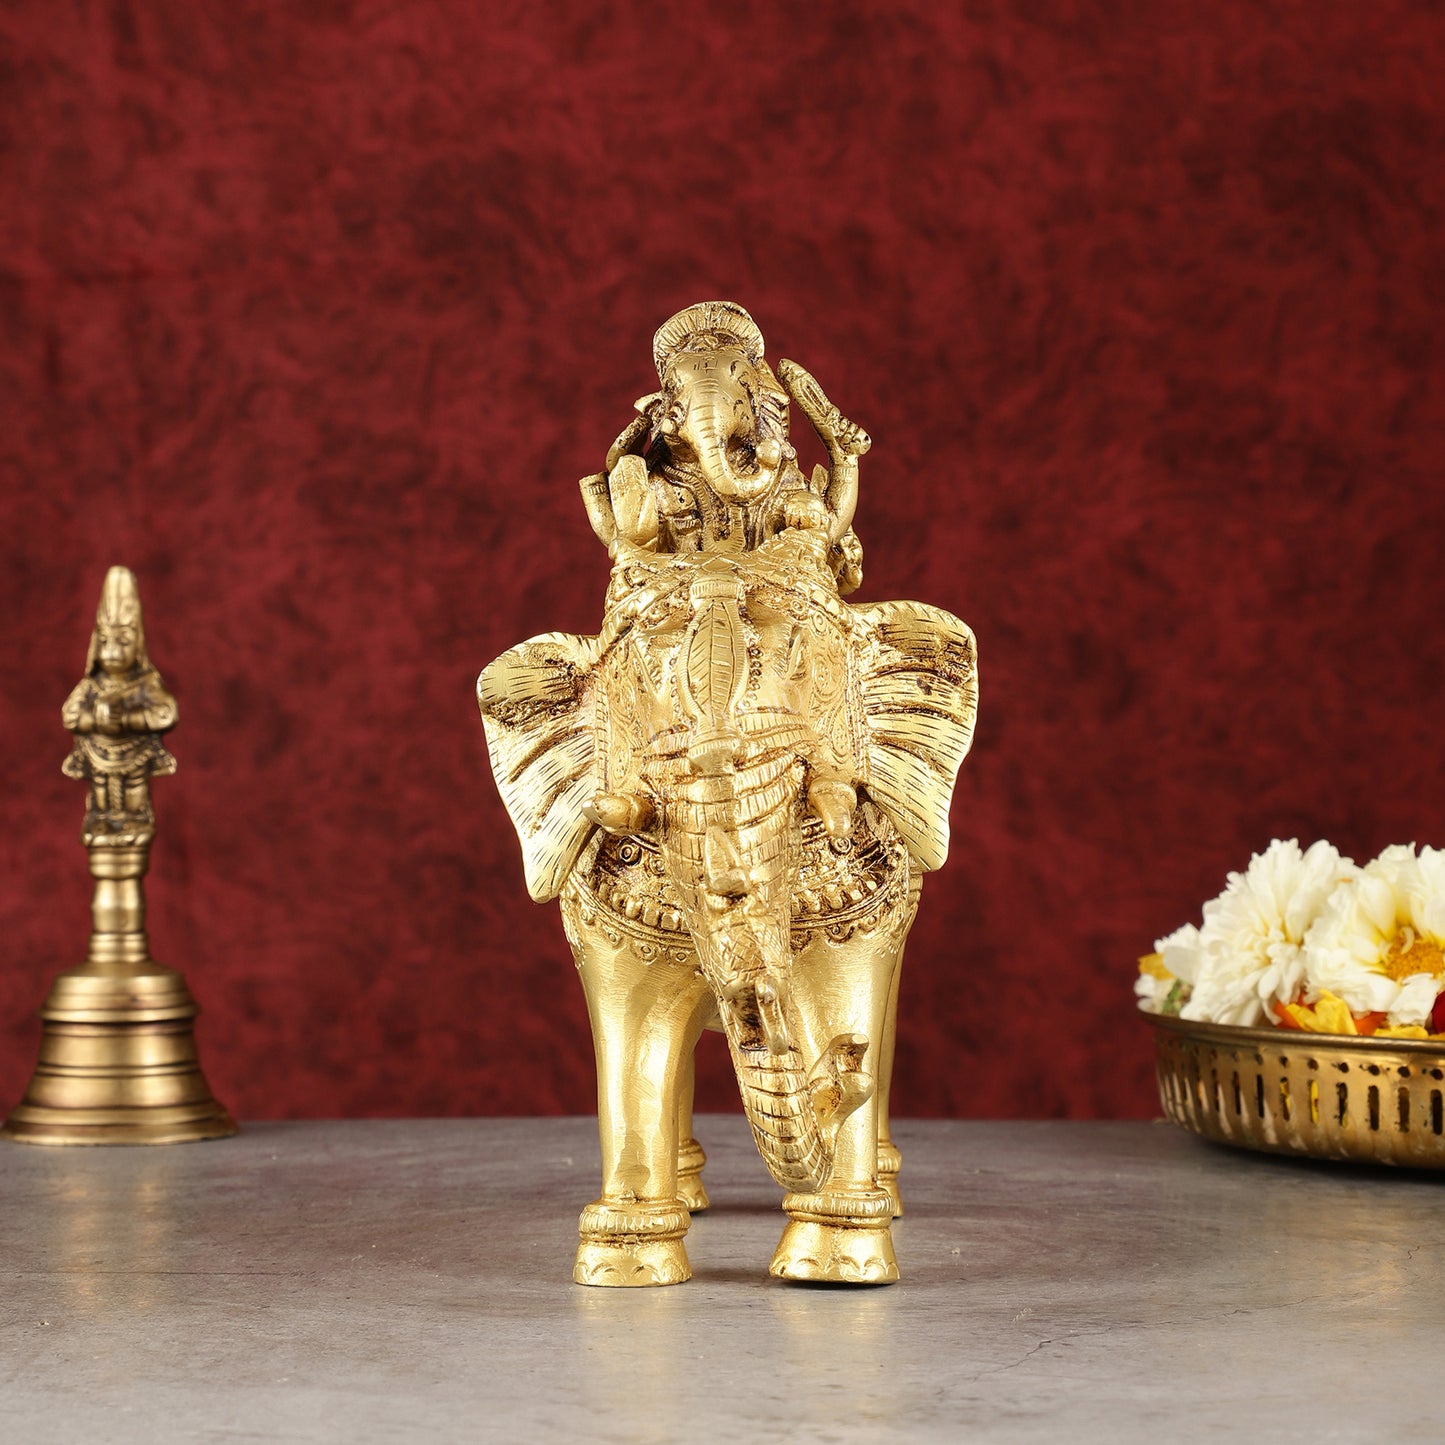 Pure Brass Handcrafted Ganesha with Riddhi Siddhi on Elephant Statue - 7.5"